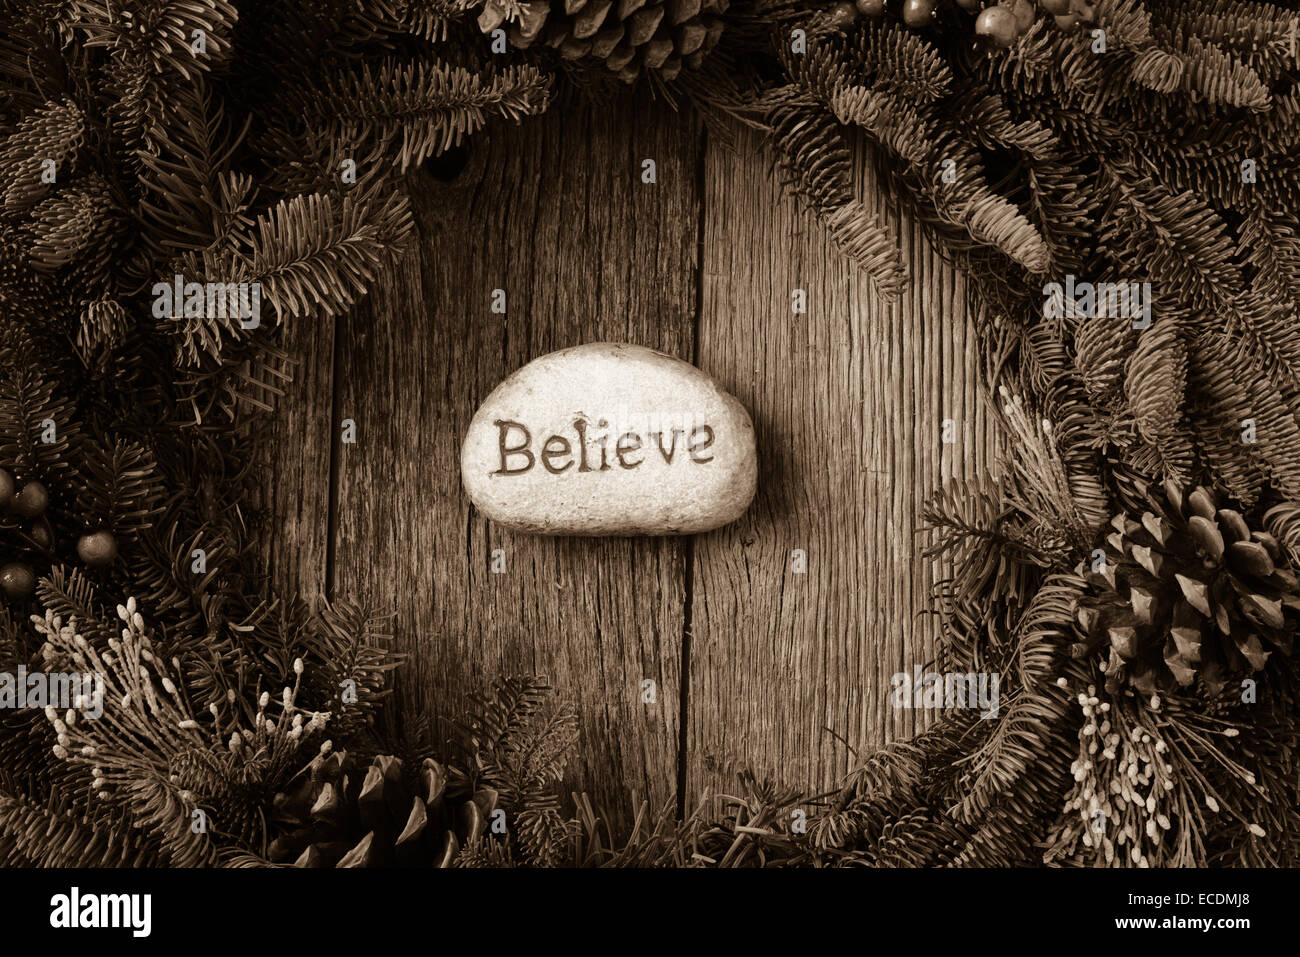 Believe in Text in the center of a Christmas Wreath Stock Photo